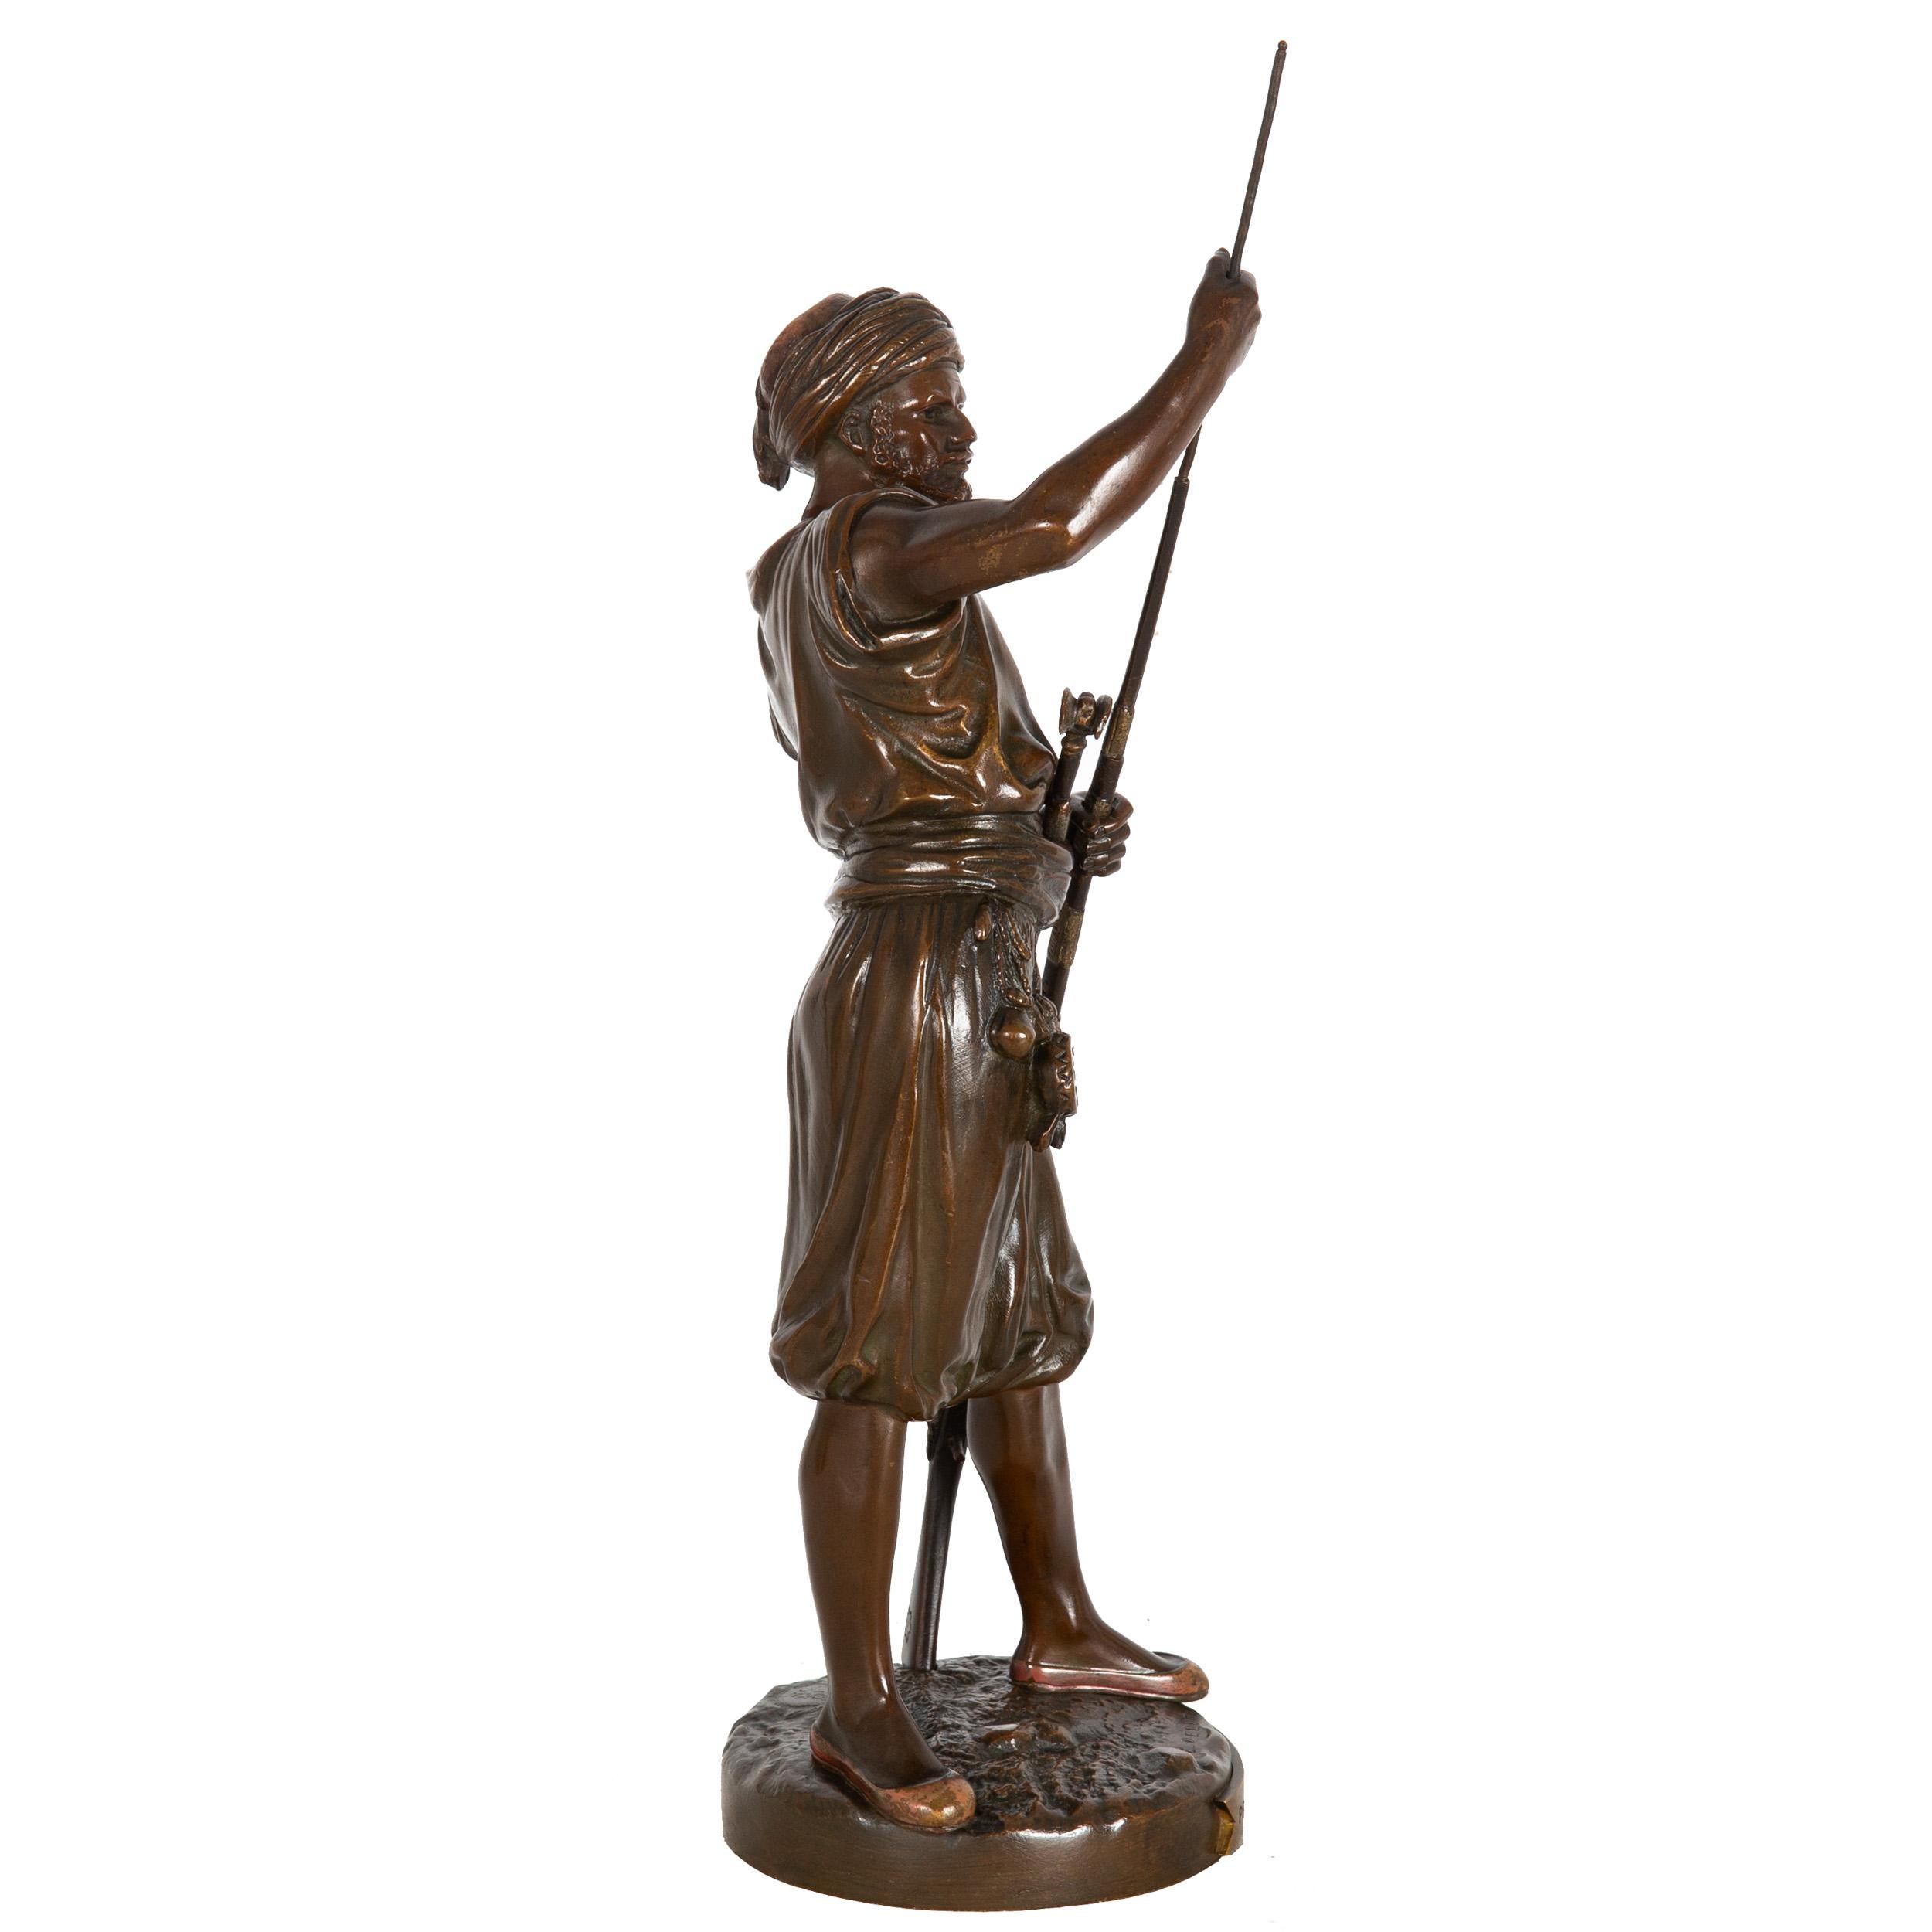 JEAN-DIDIER DEBUT
French, 1824-1893

French Orientalist Model of a Janissaire Warrior

Polychromed and patinated bronze  signed 